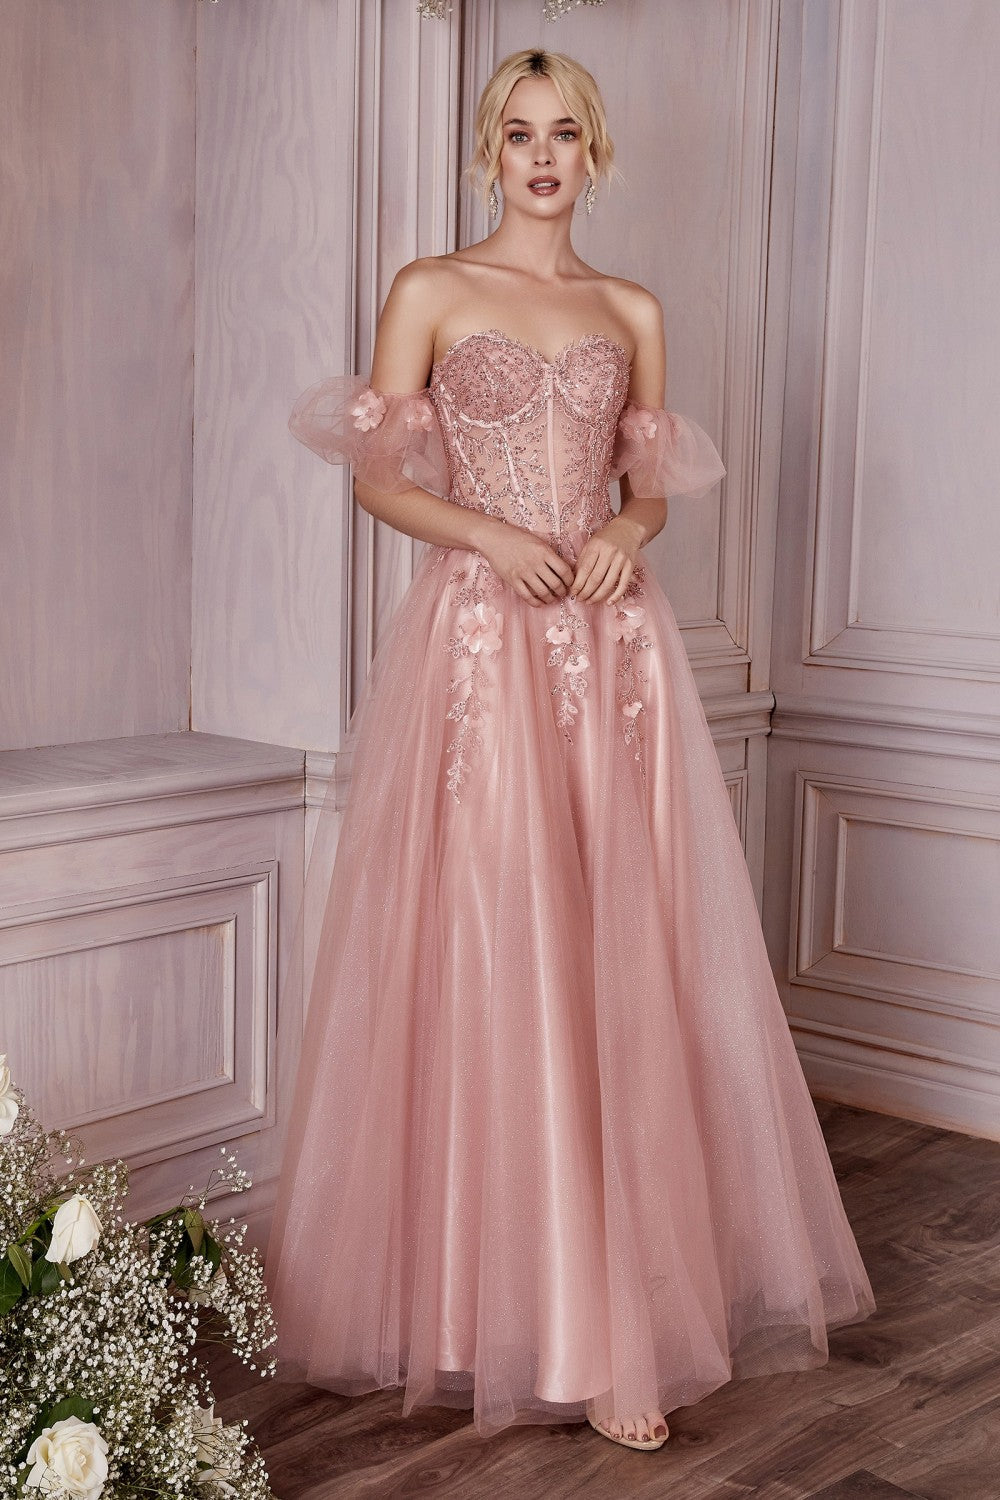 Strapless Layered Tulle Ball & Prom Gown Structured Embroidered Sequin Appliqué Corset Floral Vintage Dress A-line Skirt CDCD0191-1